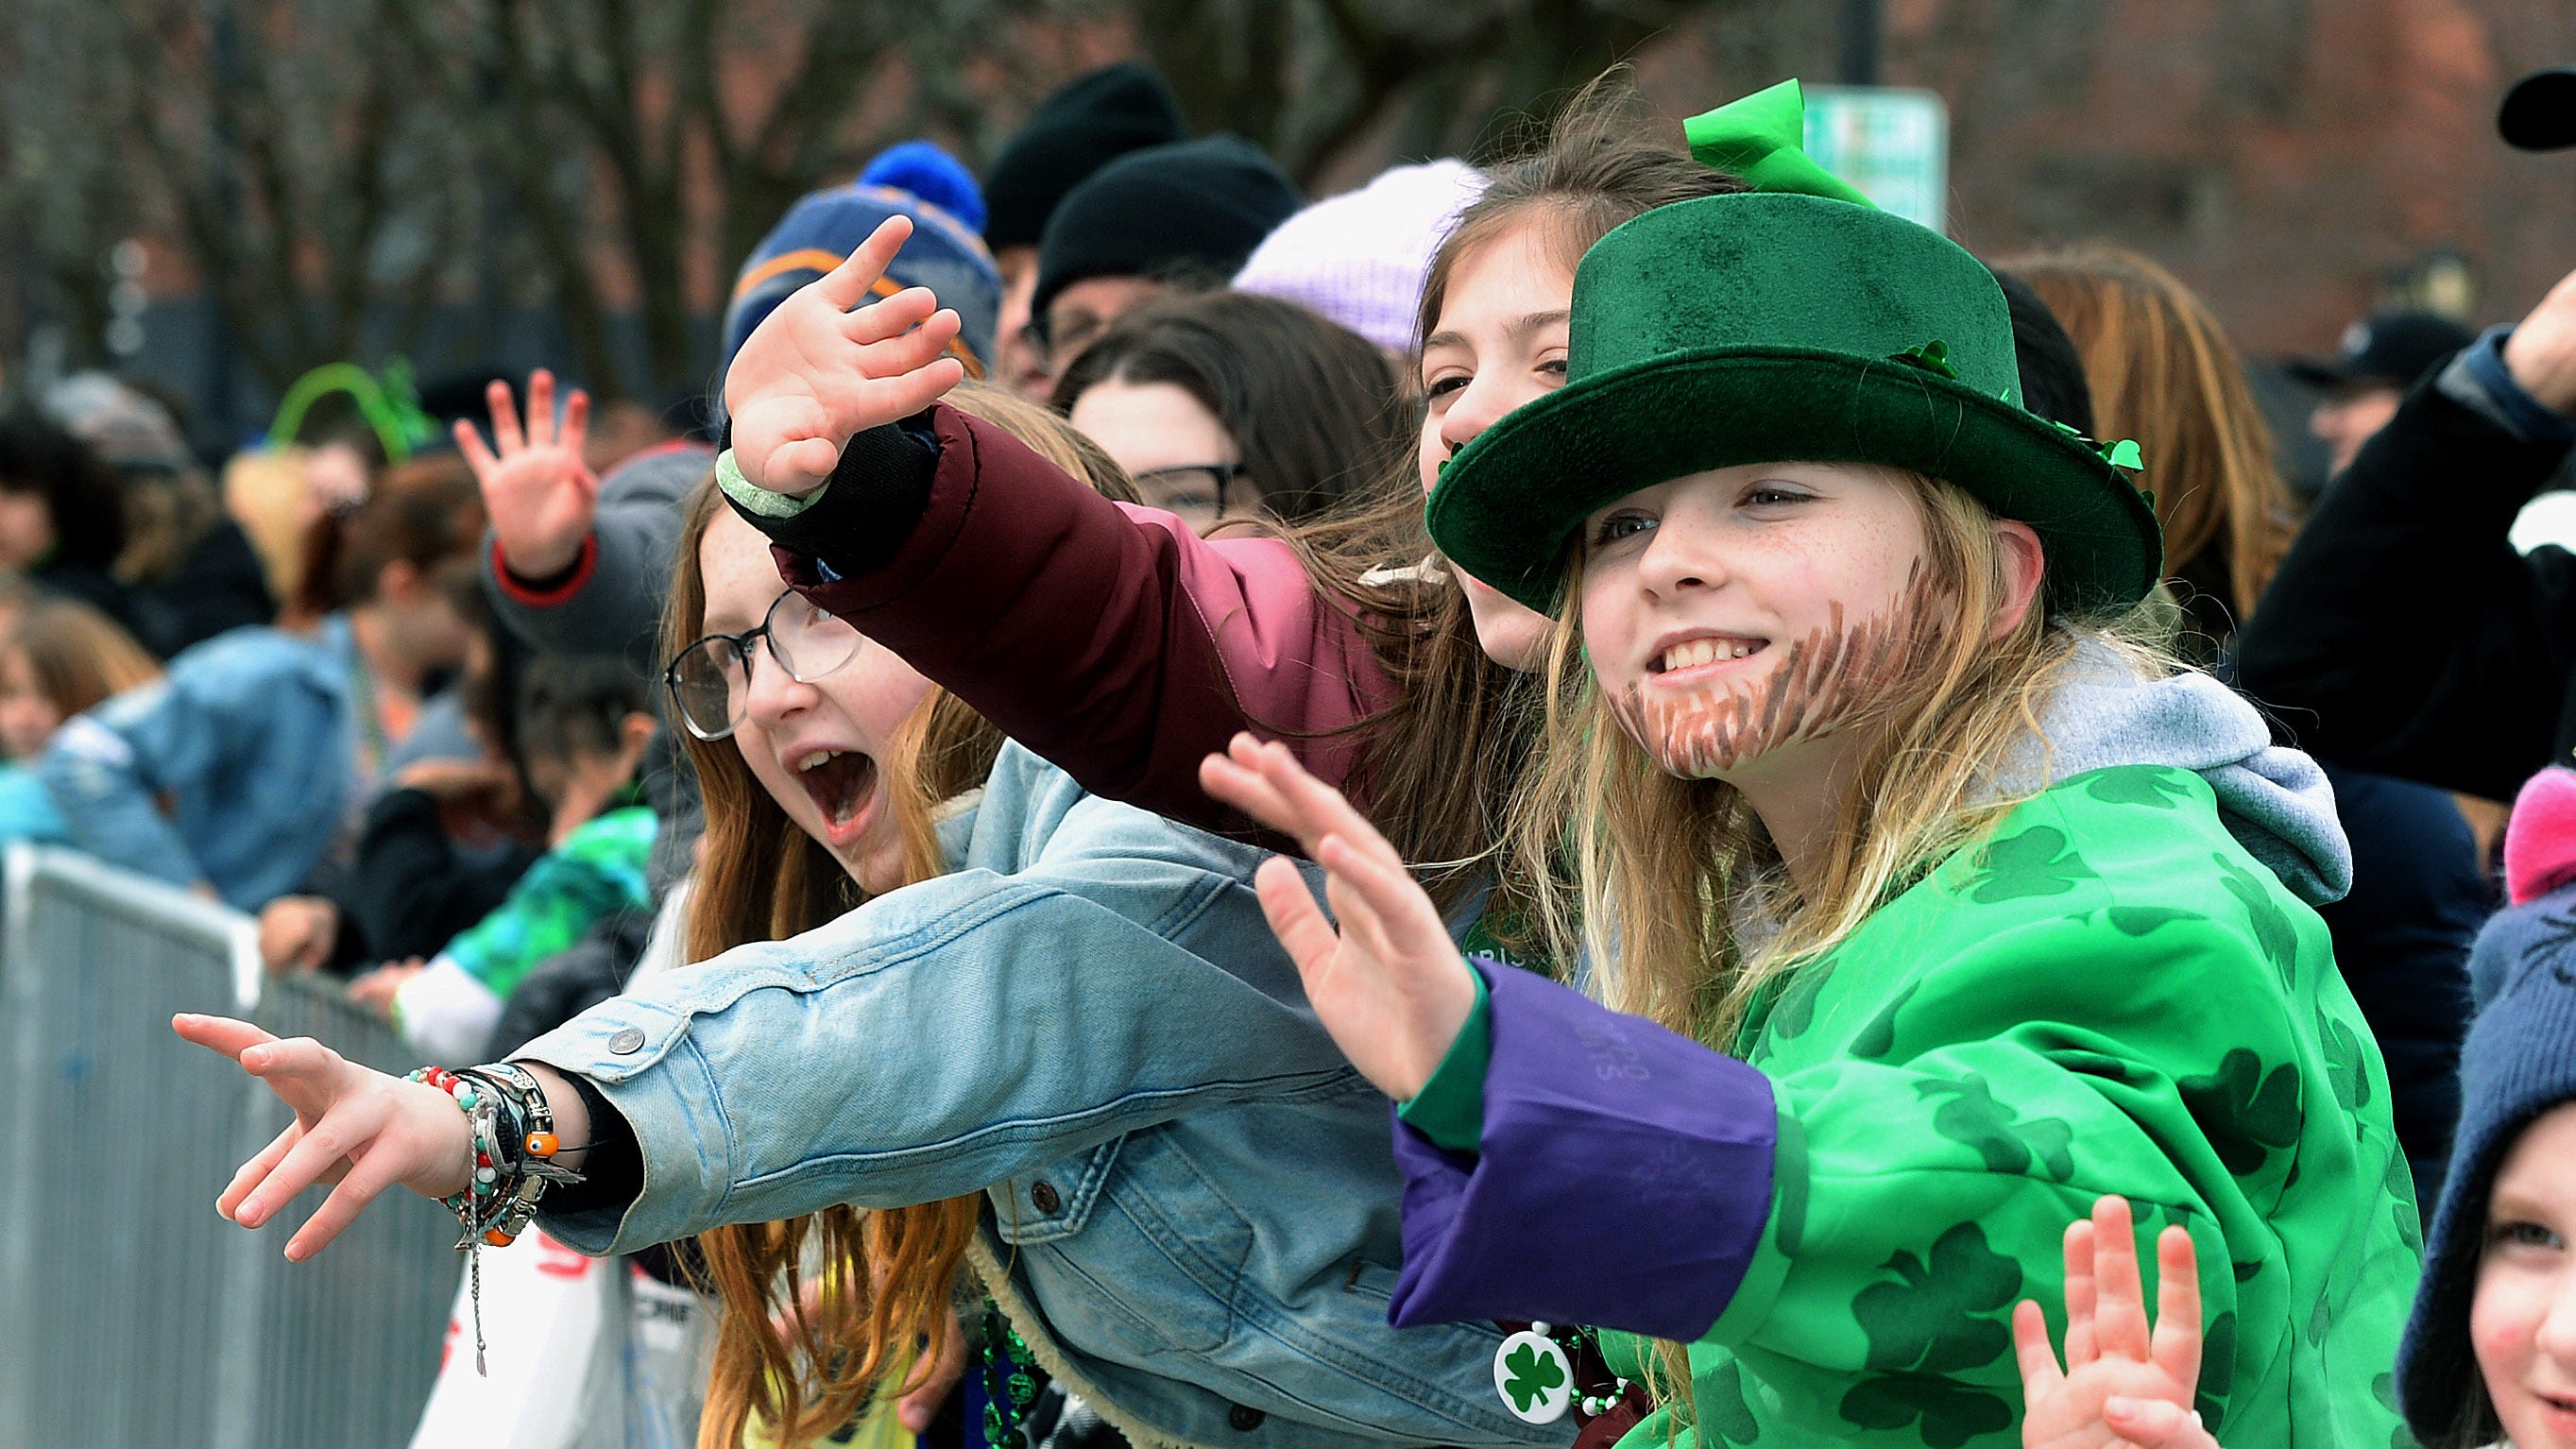  Saint Patrick's Day parade, painting leprechauns and more: 5 things to do in Springfield 